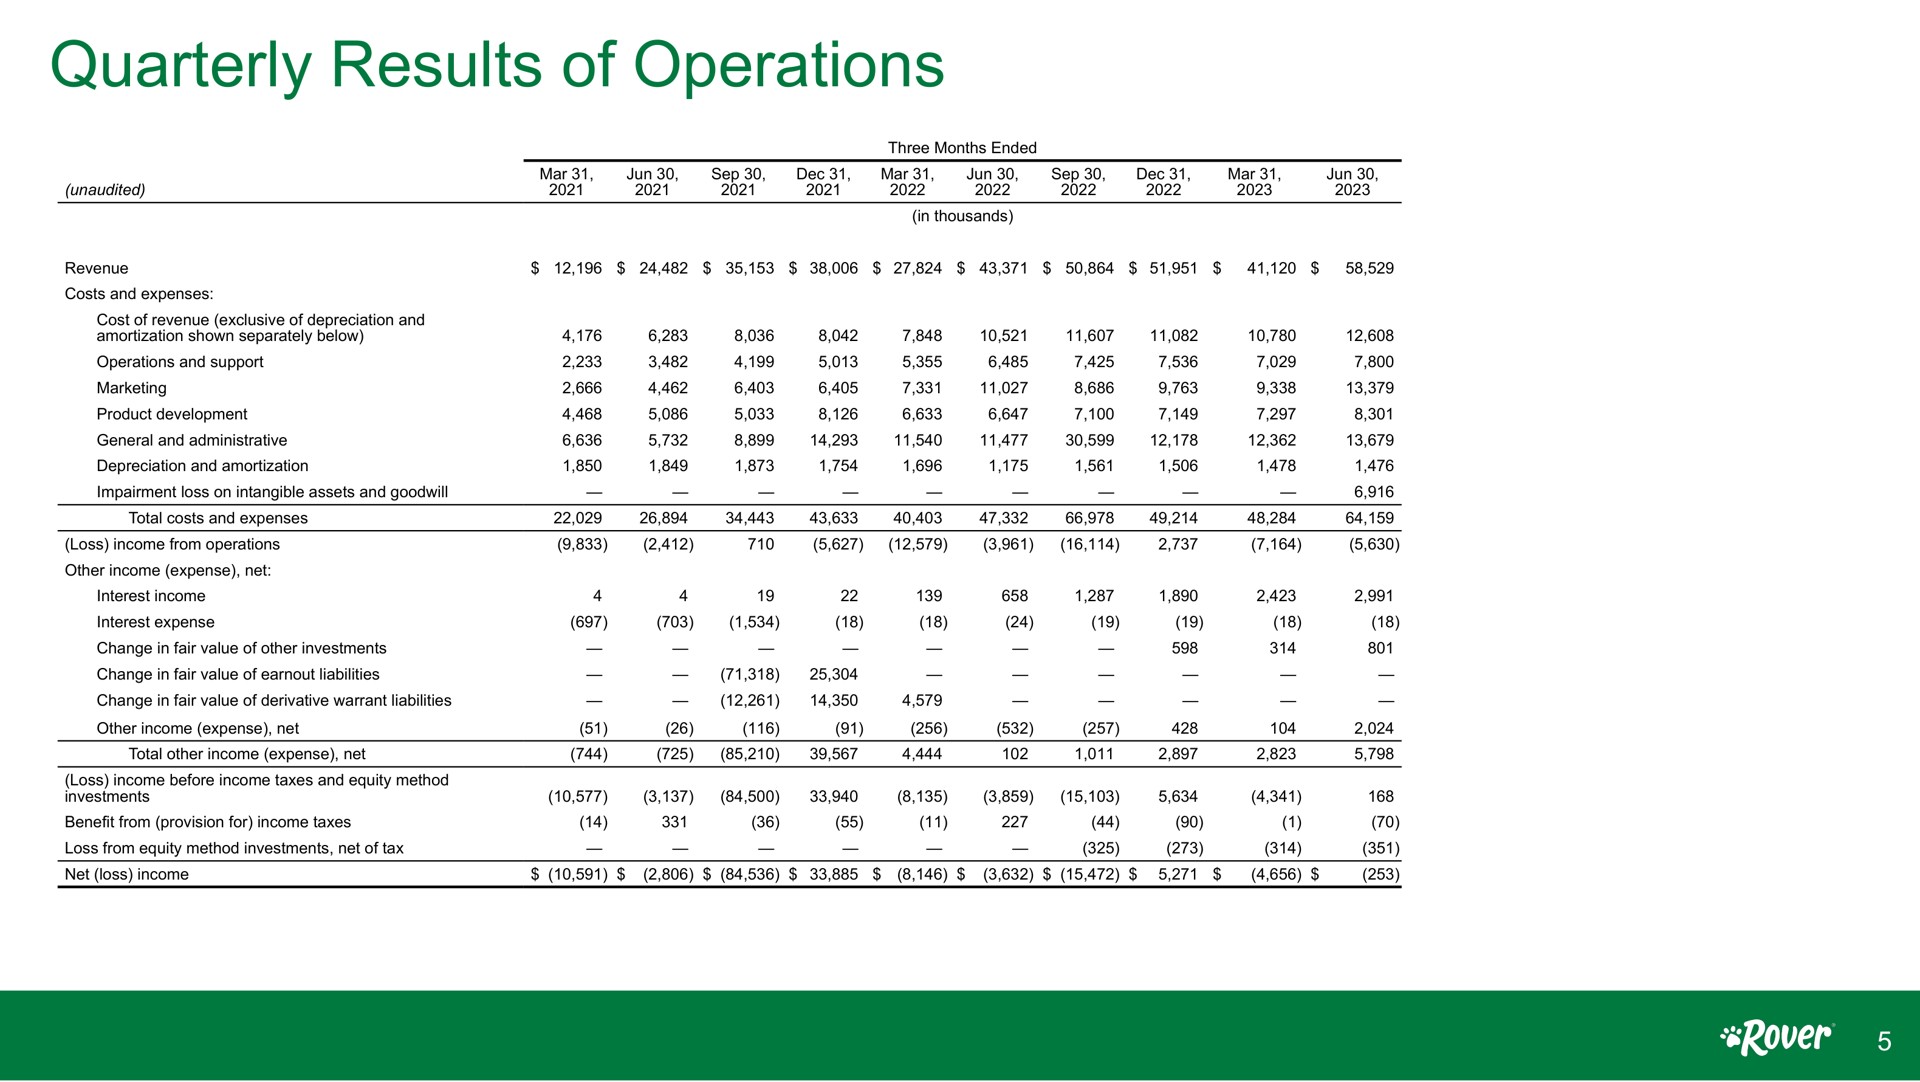 quarterly results of operations | Rover